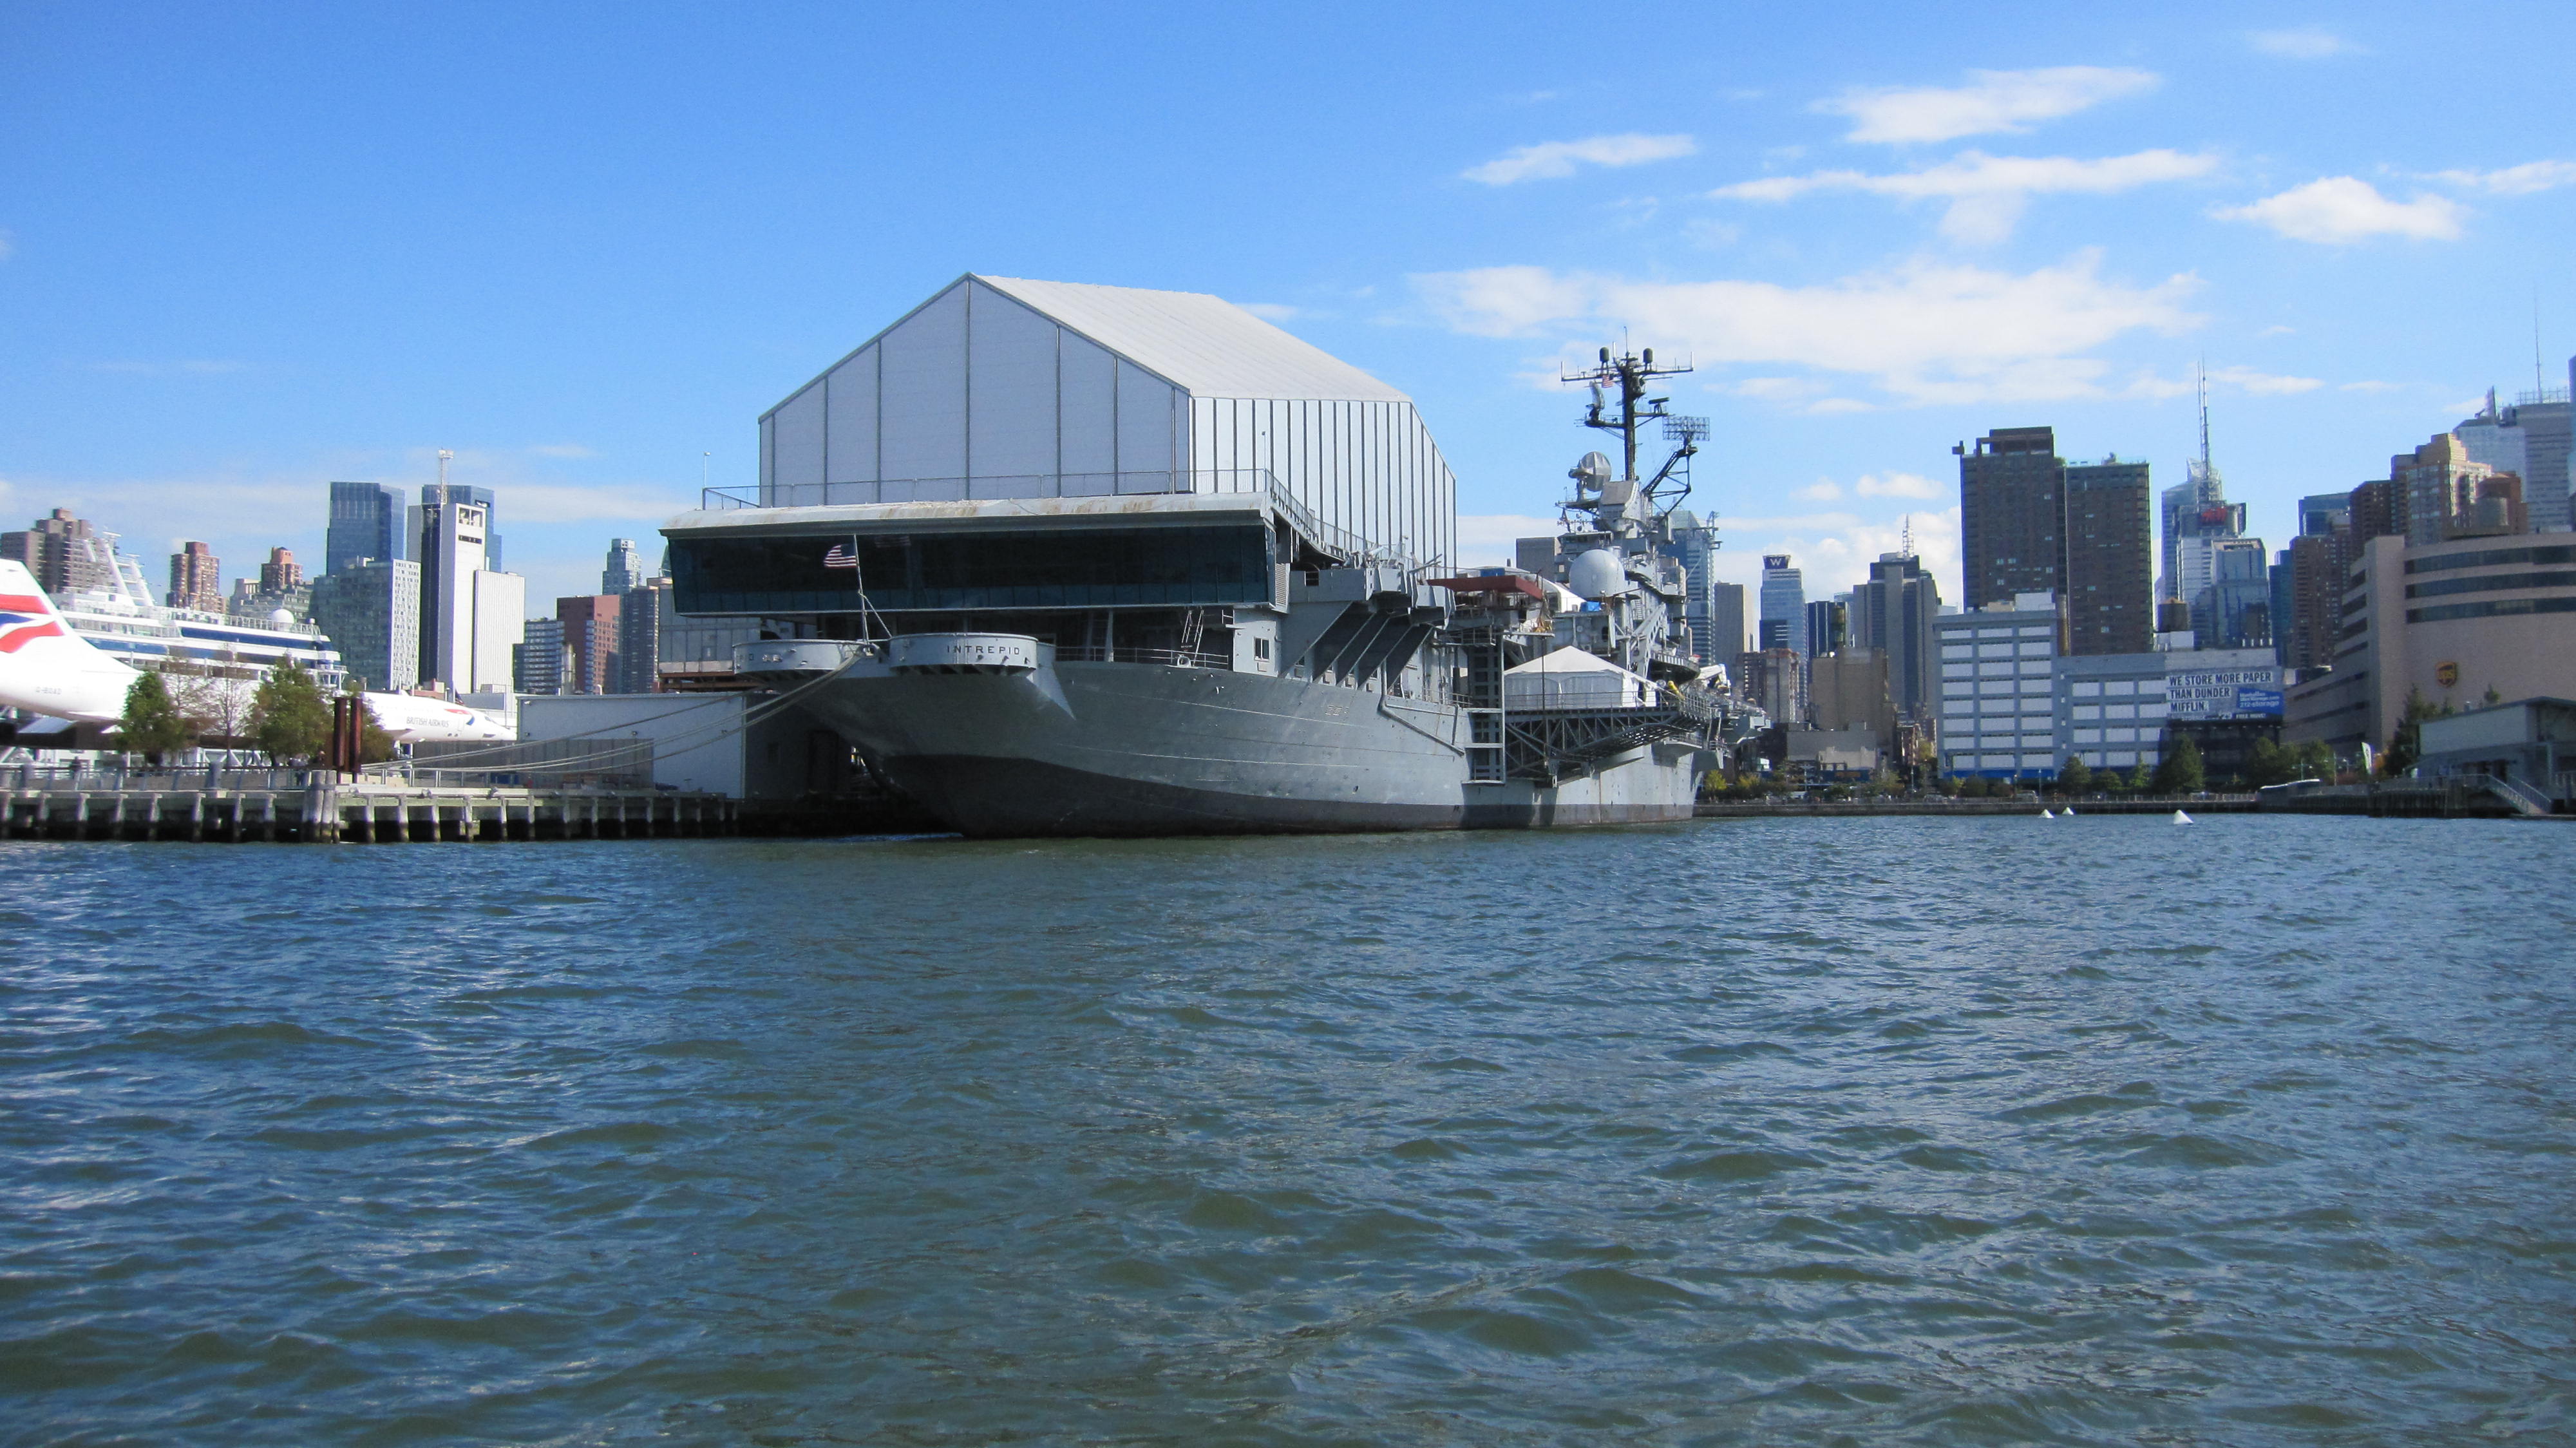 Intrepid from the water